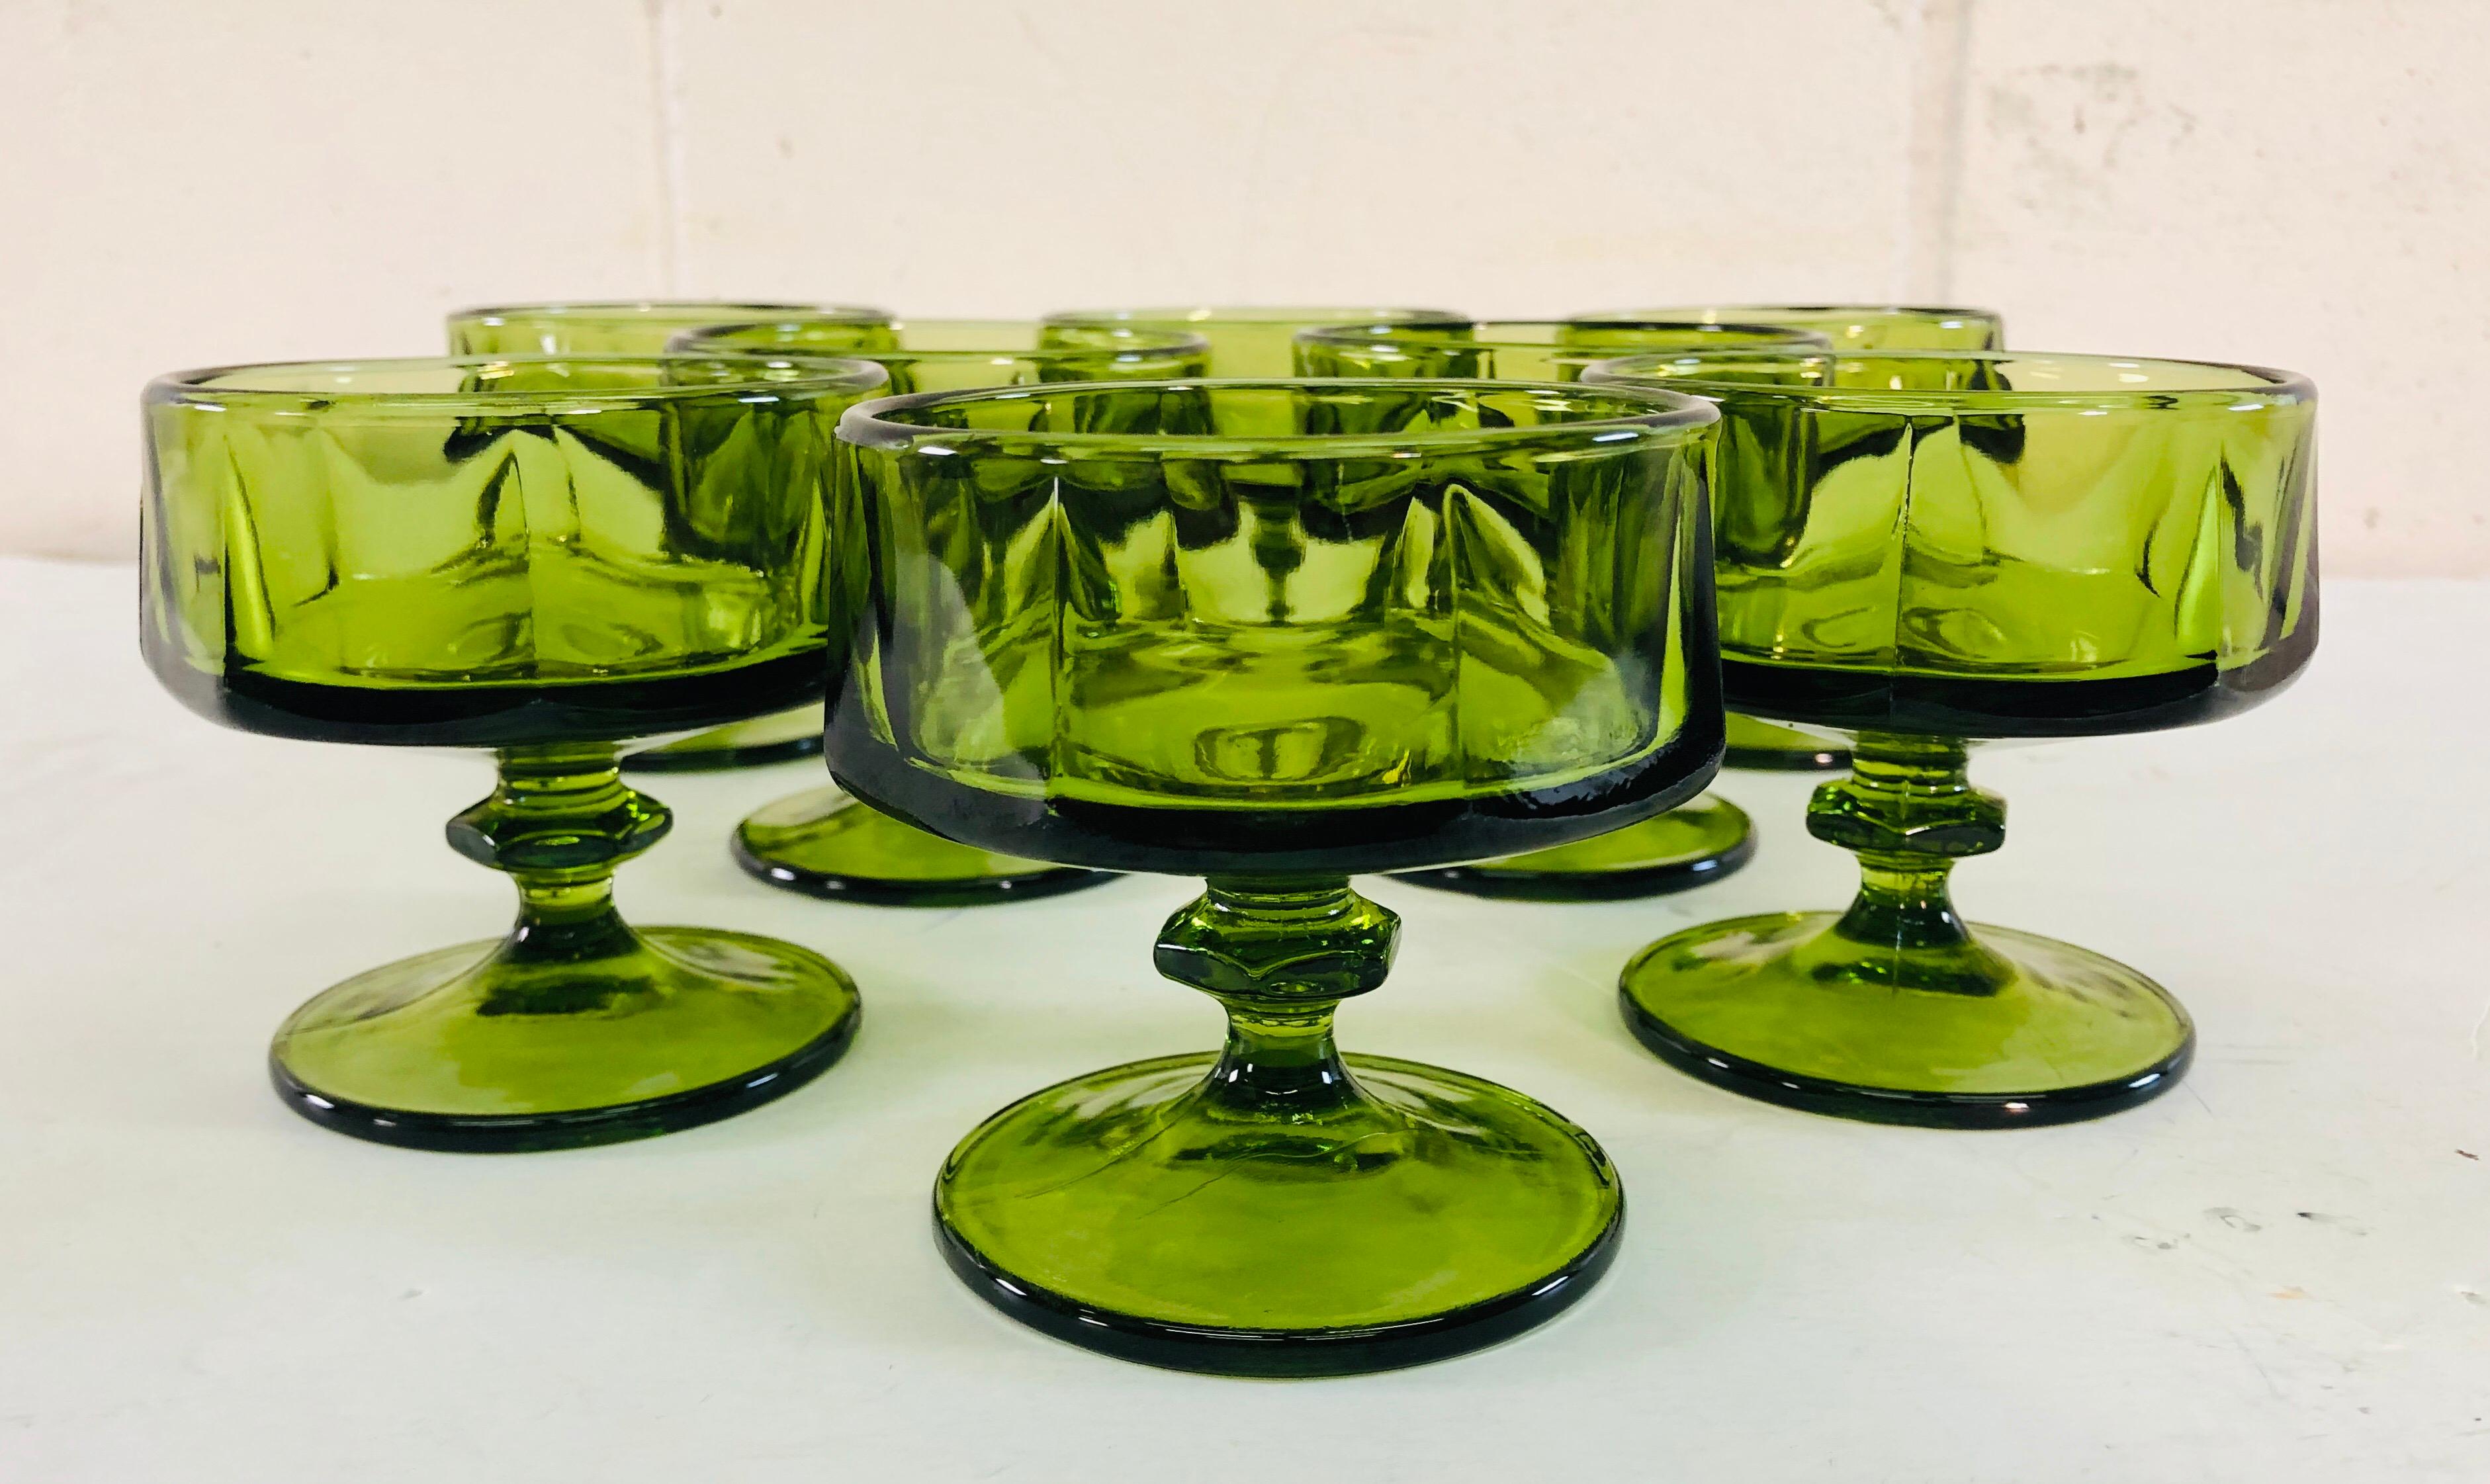 Vintage Mid-Century Modern set of 8 green glass low coupes. Solid glass with good weight. No marks. Excellent condition.